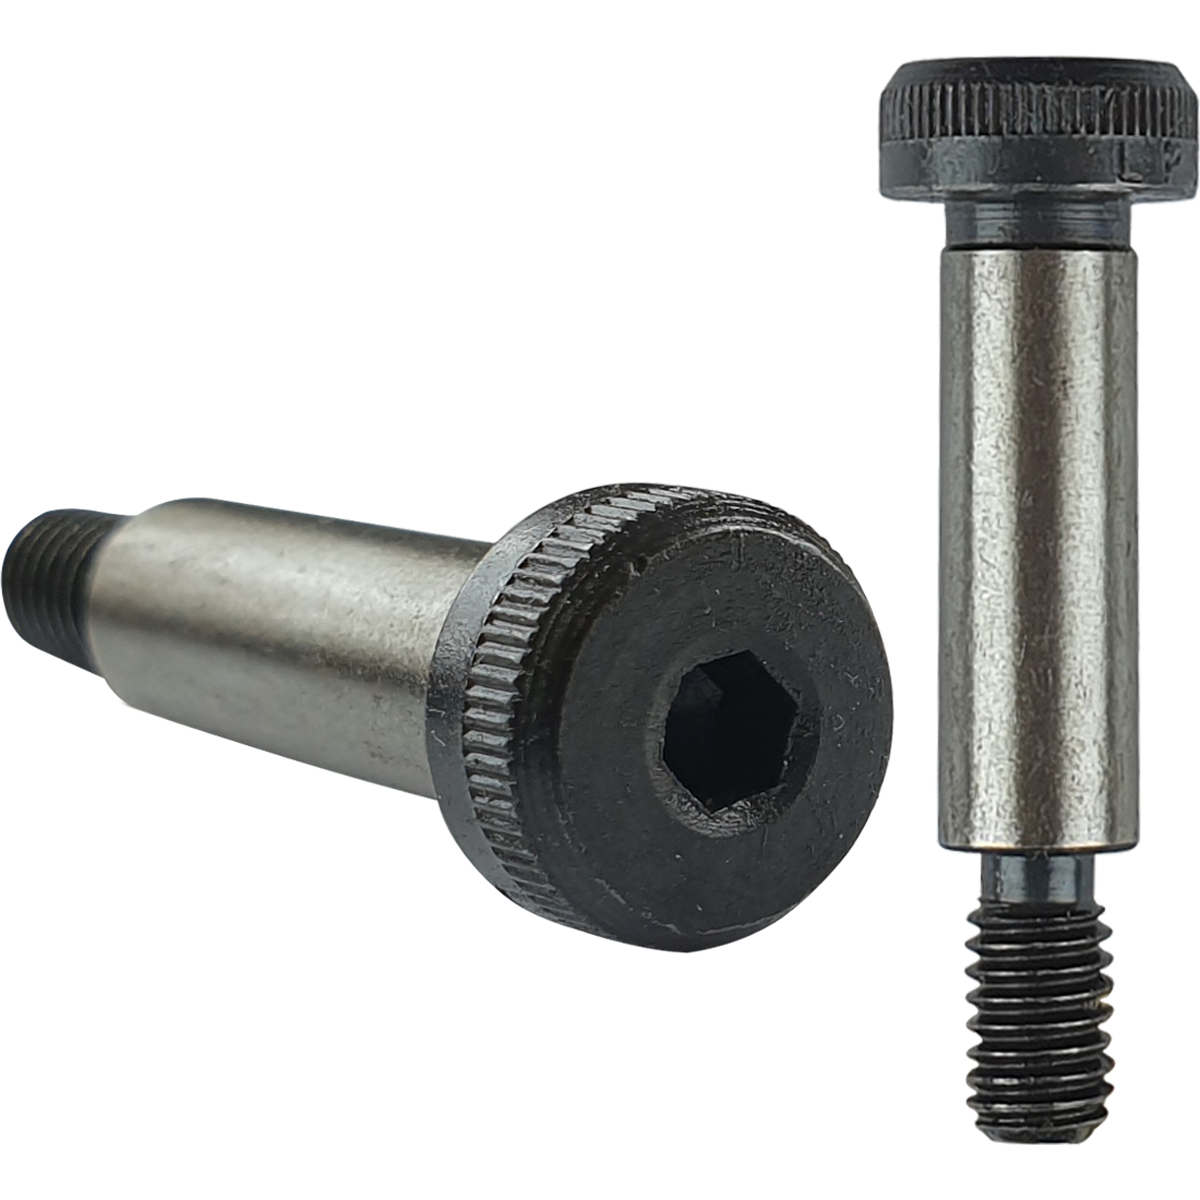 A growing range of UNC, Self-colour socket shoulder screws also known as Shoulder bolts. Part of a growing range in stock.